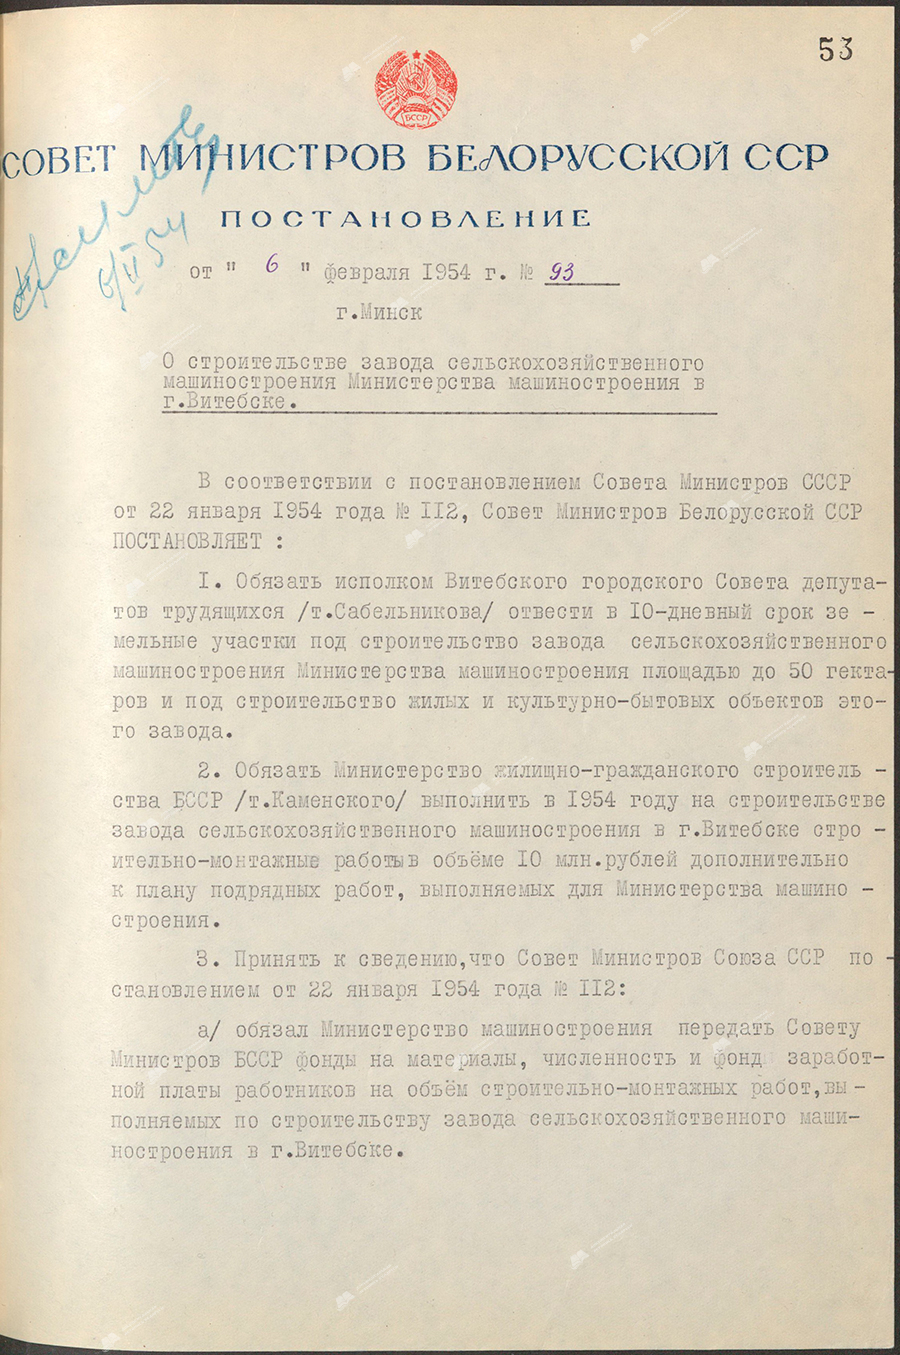 Resolution No. 93 of the Council of Ministers of the Byelorussian SSR «On the construction of an agricultural machinery plant of the Ministry of Mechanical Engineering in Vitebsk»-с. 0